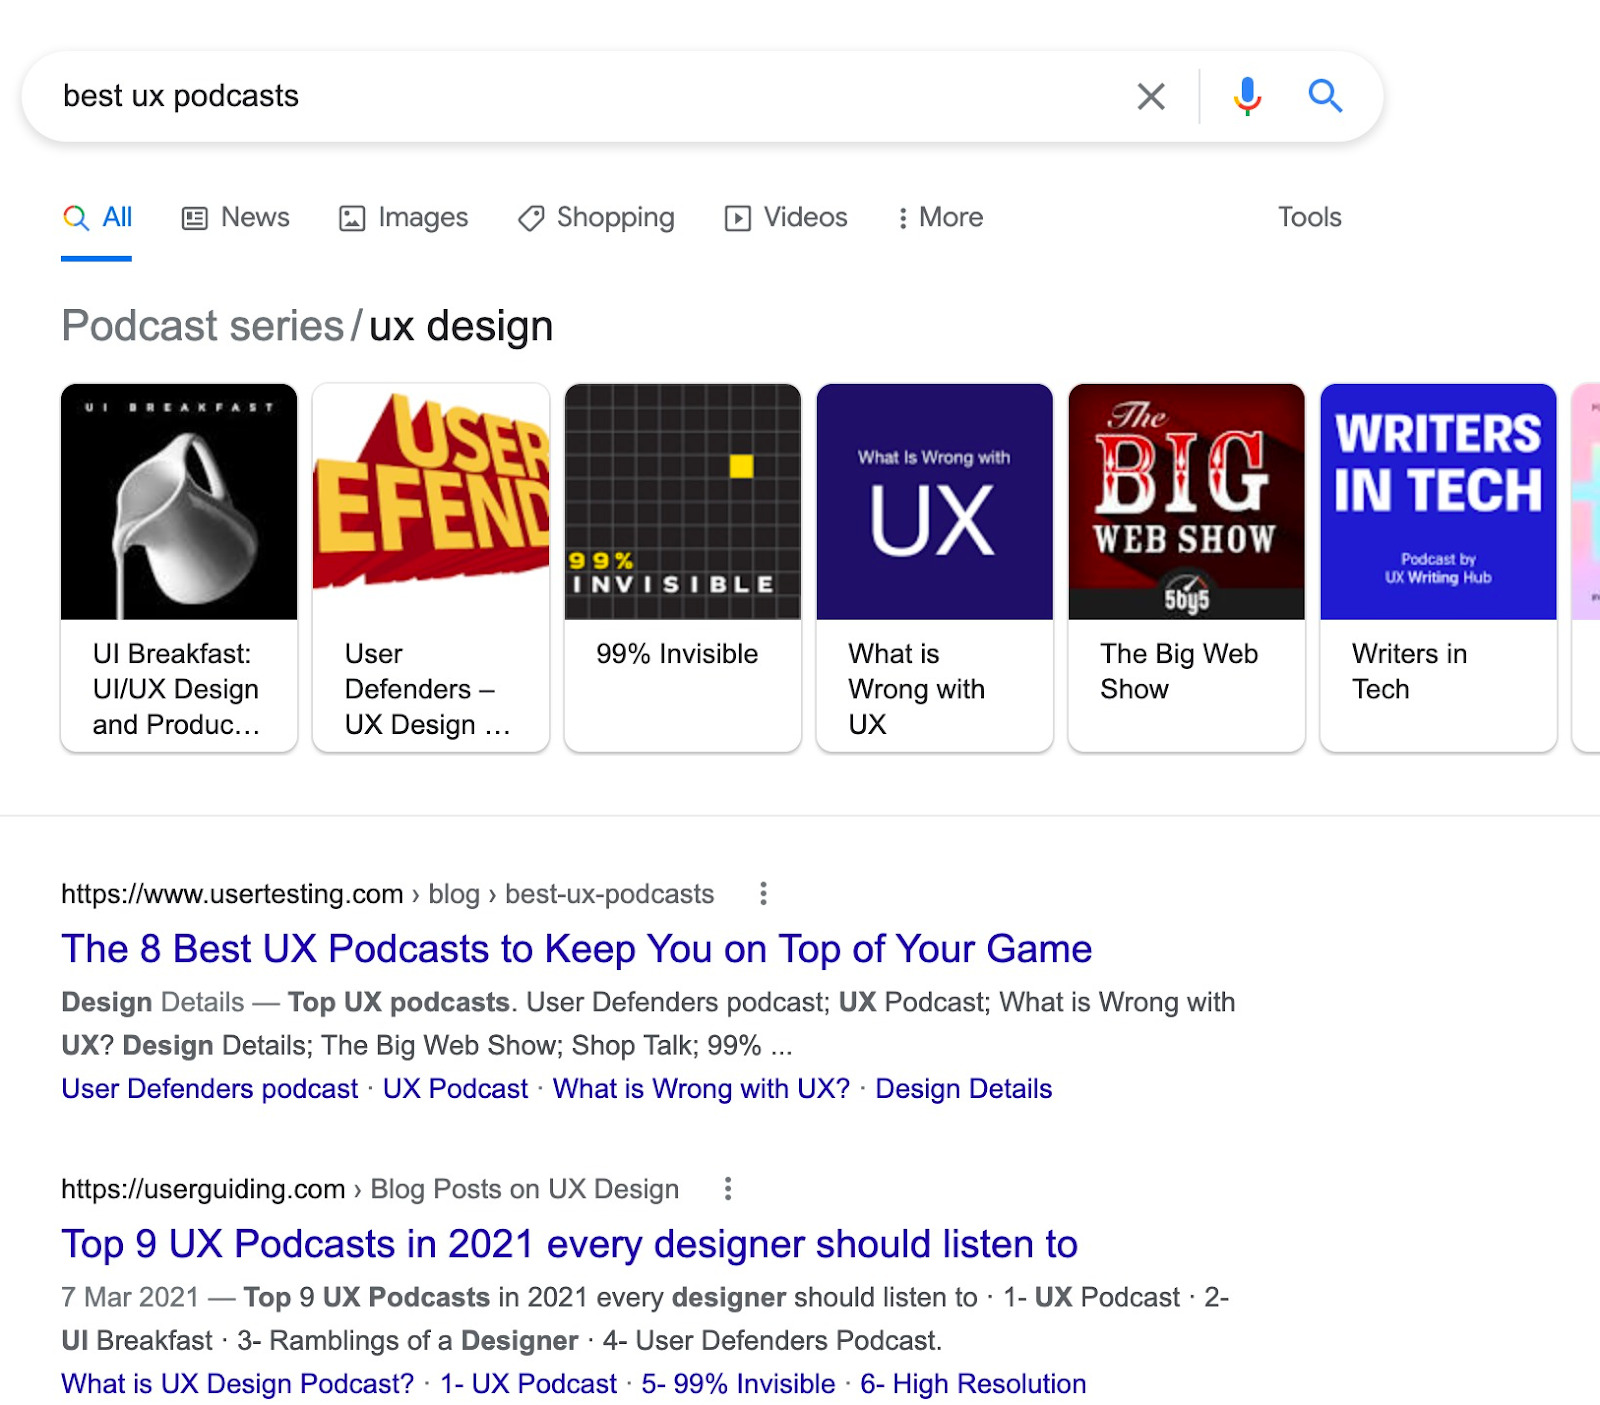 Google search results of "best ux products"